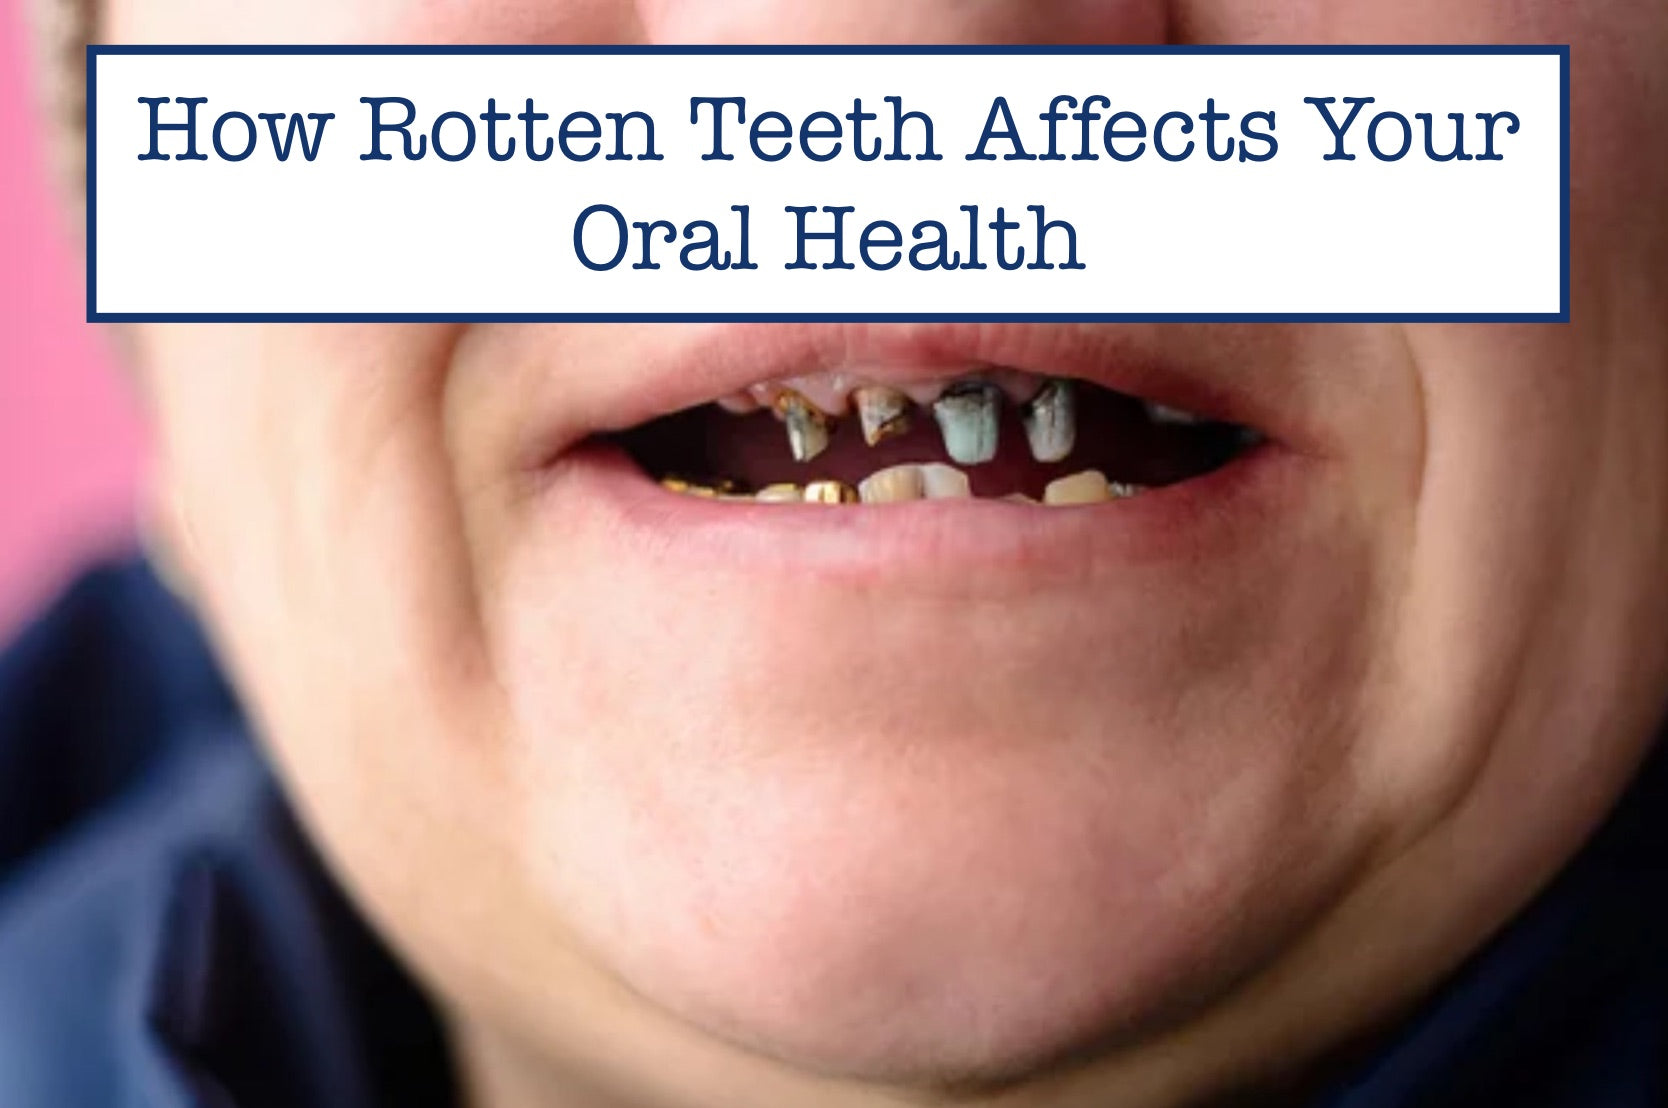 How Rotten Teeth Affects Your Oral Health